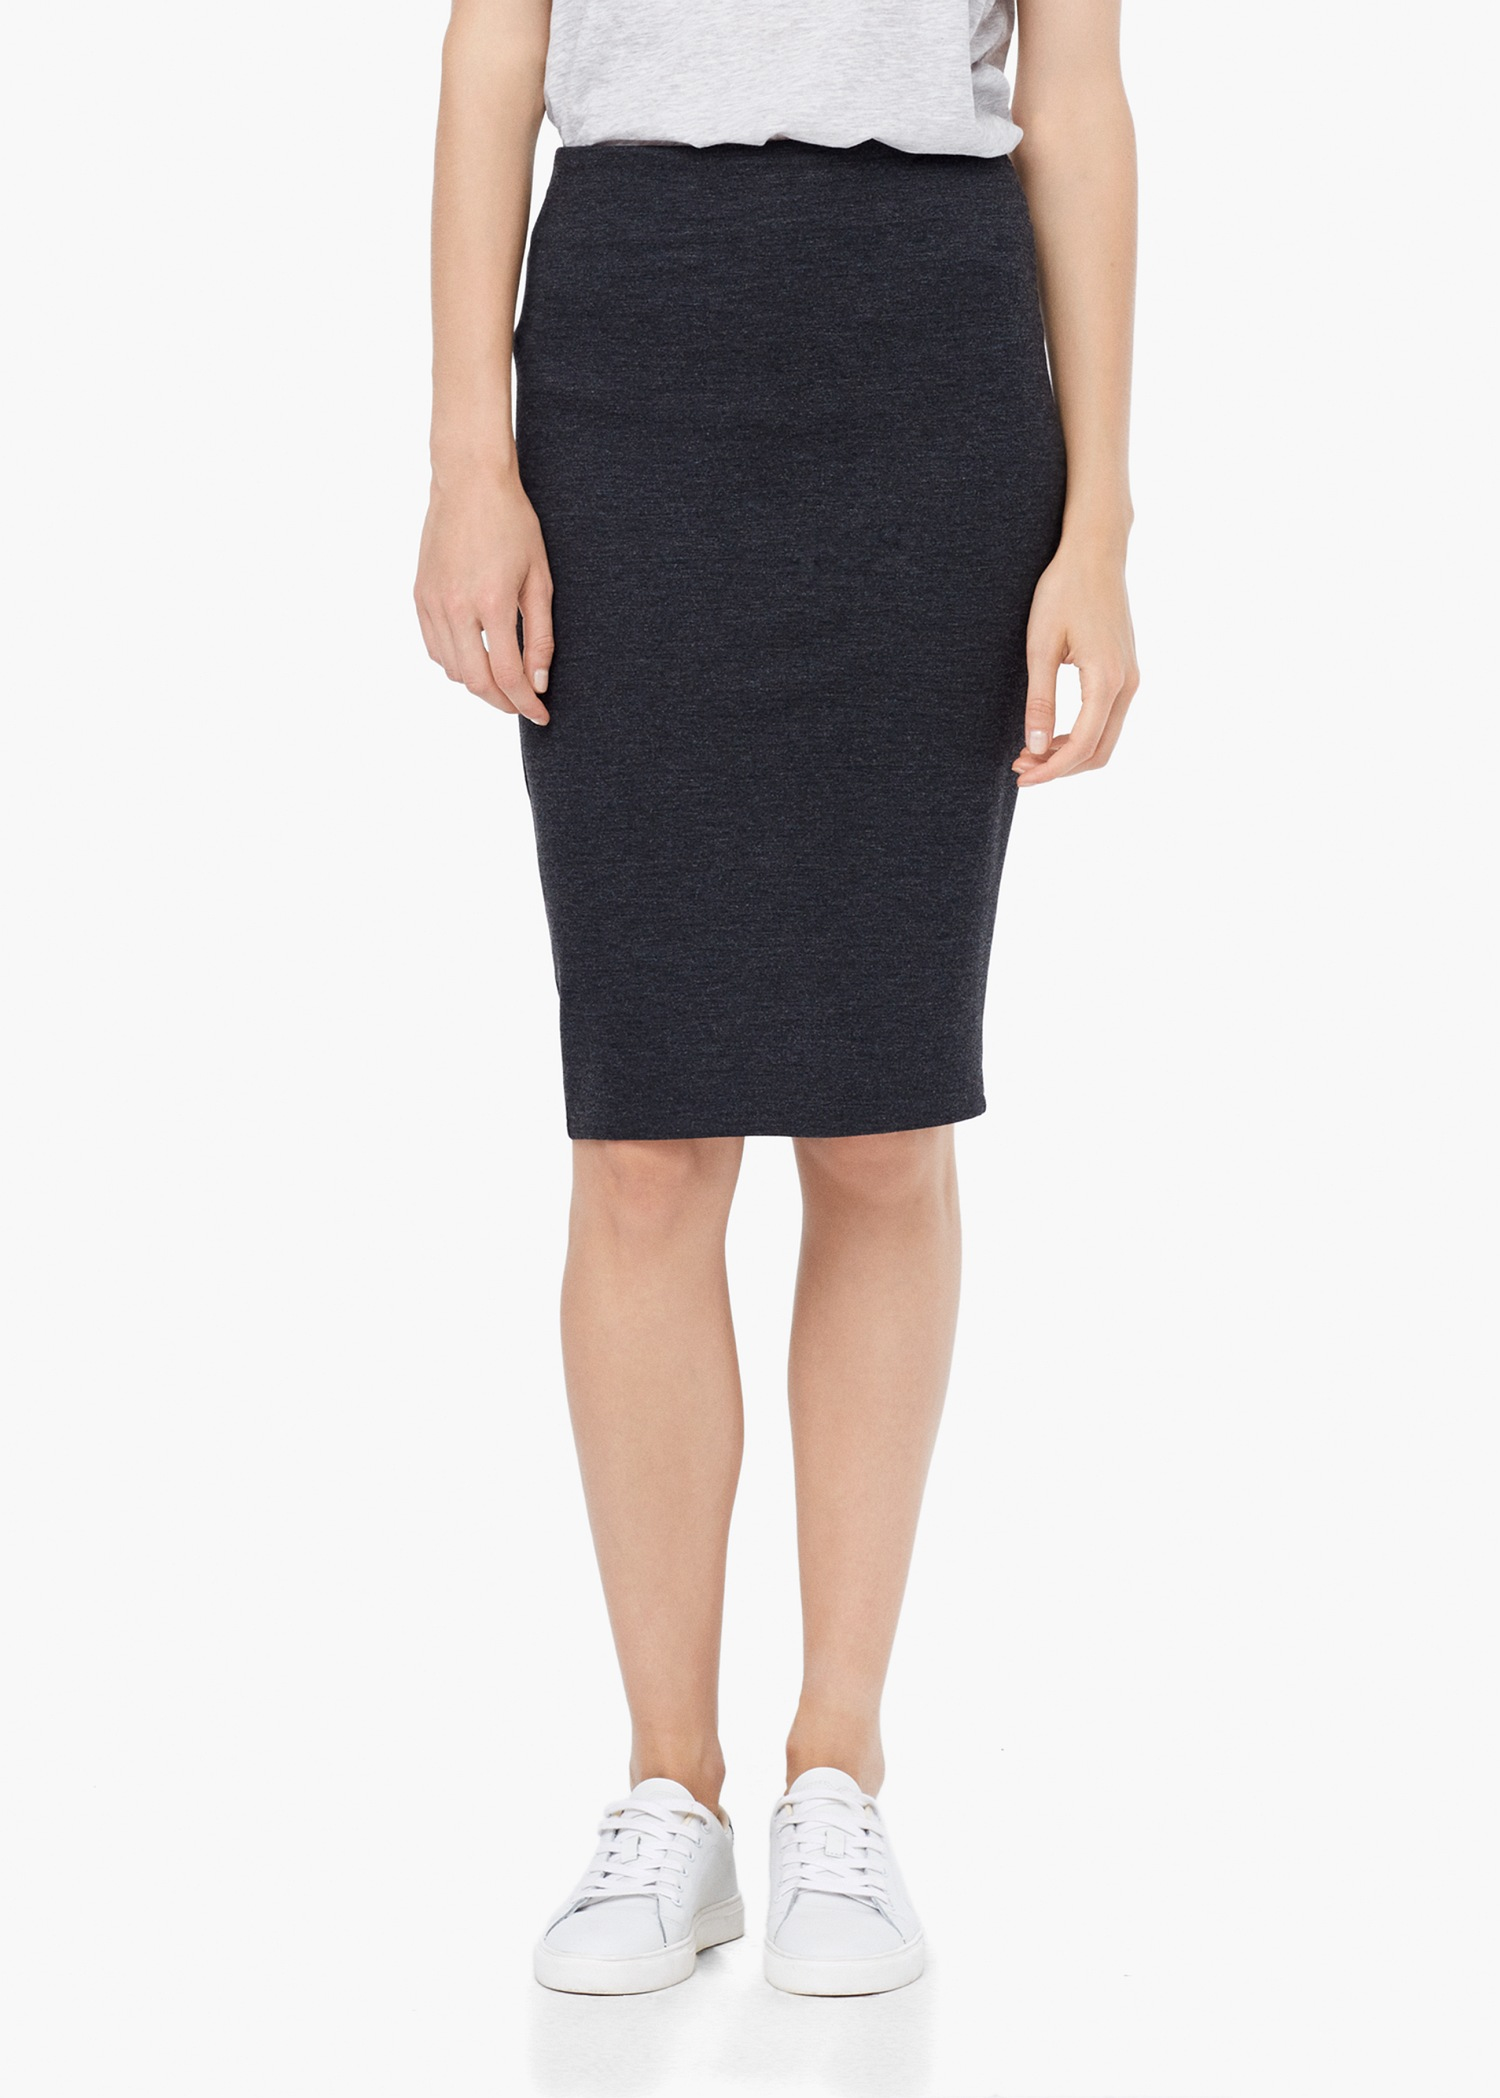 Lyst - Mango Back Vent Pencil Skirt in Gray